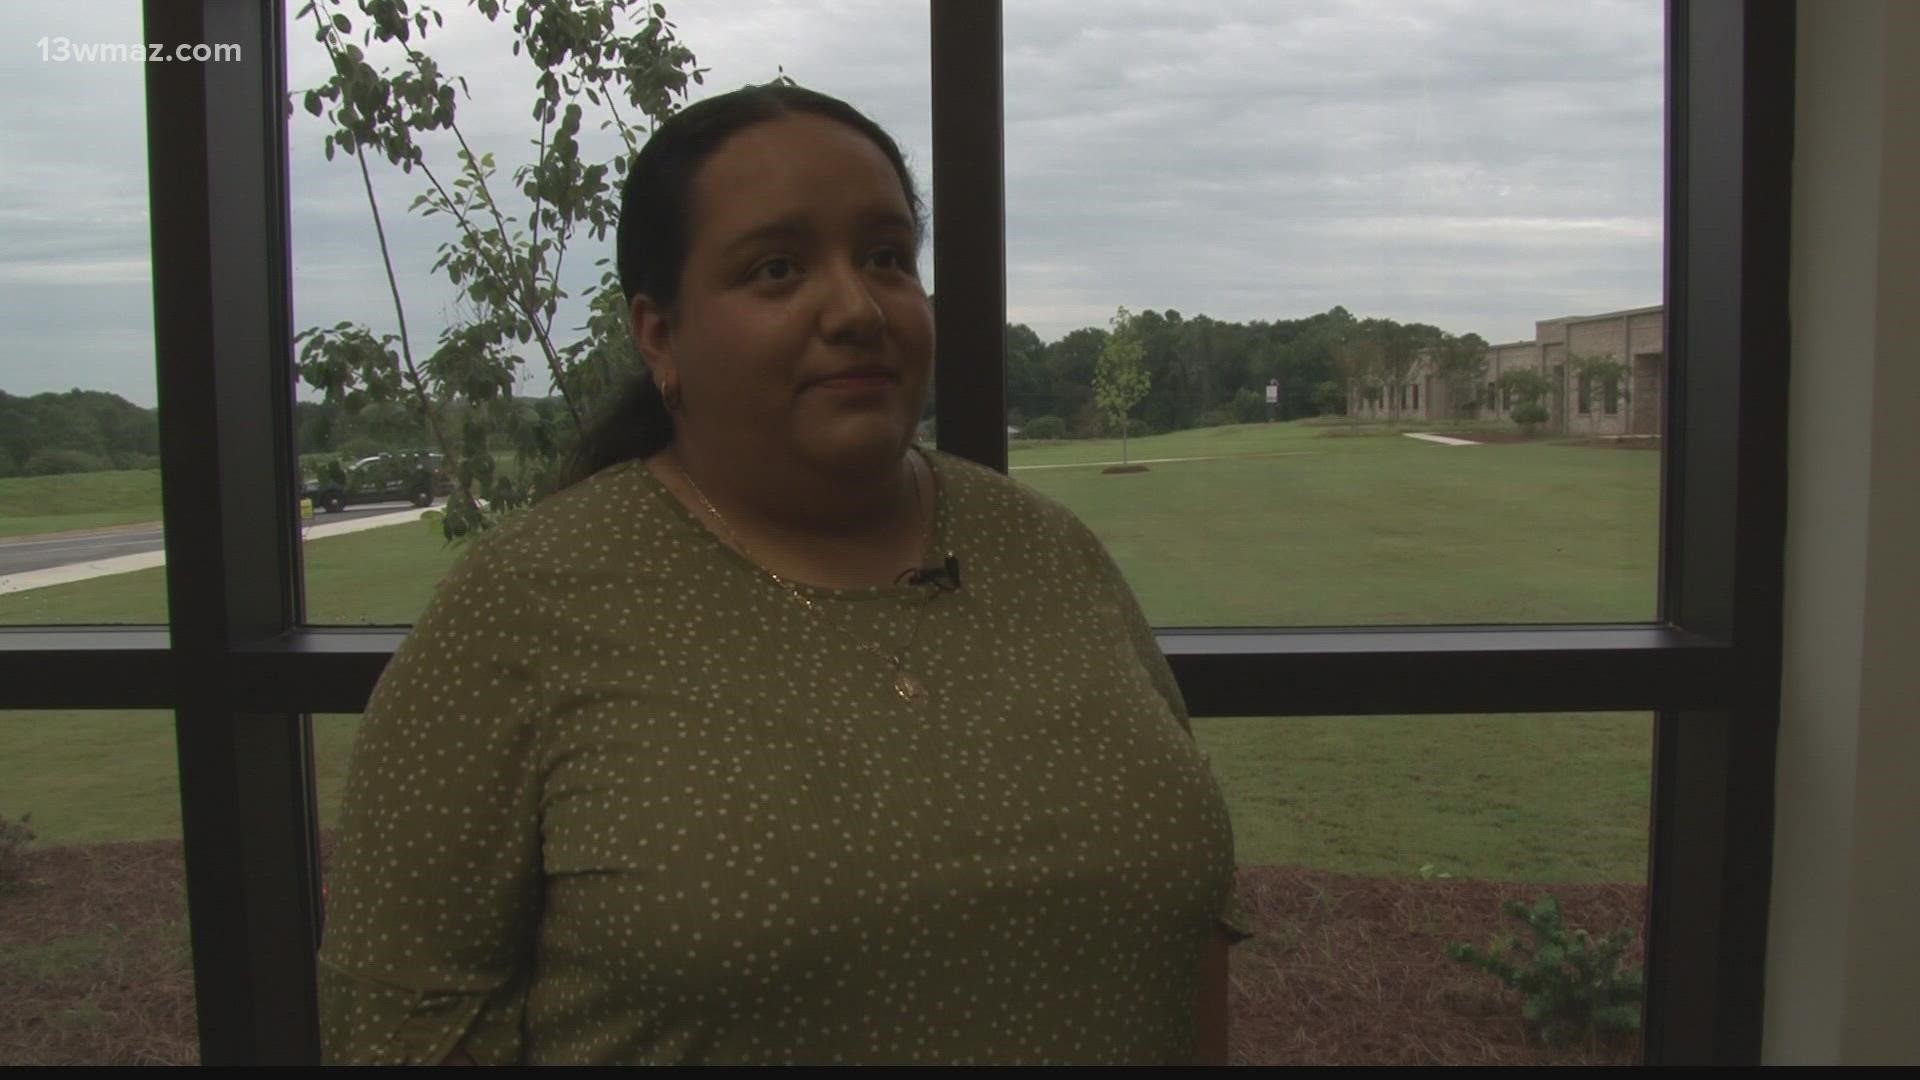 Luz Morales was recently named the district-wide Teacher of the Year in Peach County.